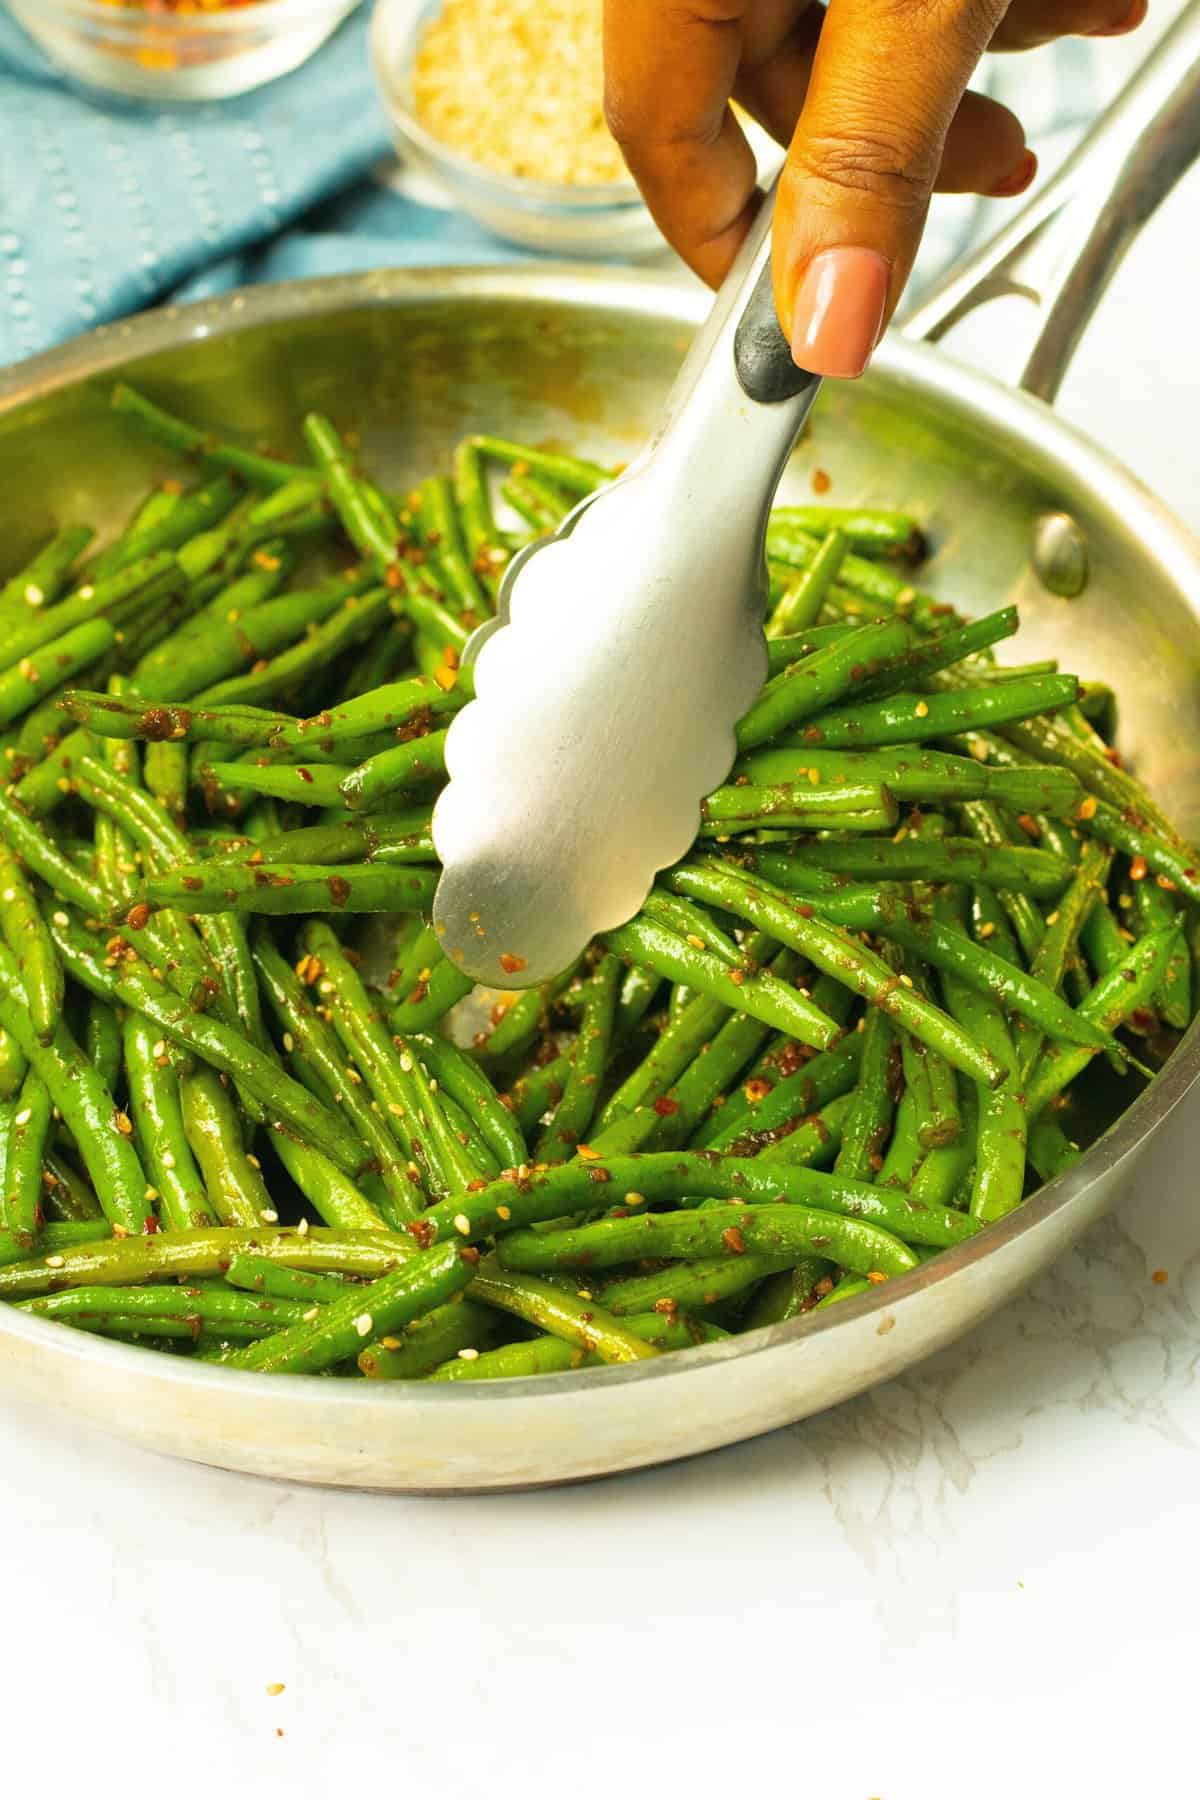 Serving up insanely delicious Spicy Green Beans fresh from the skillet